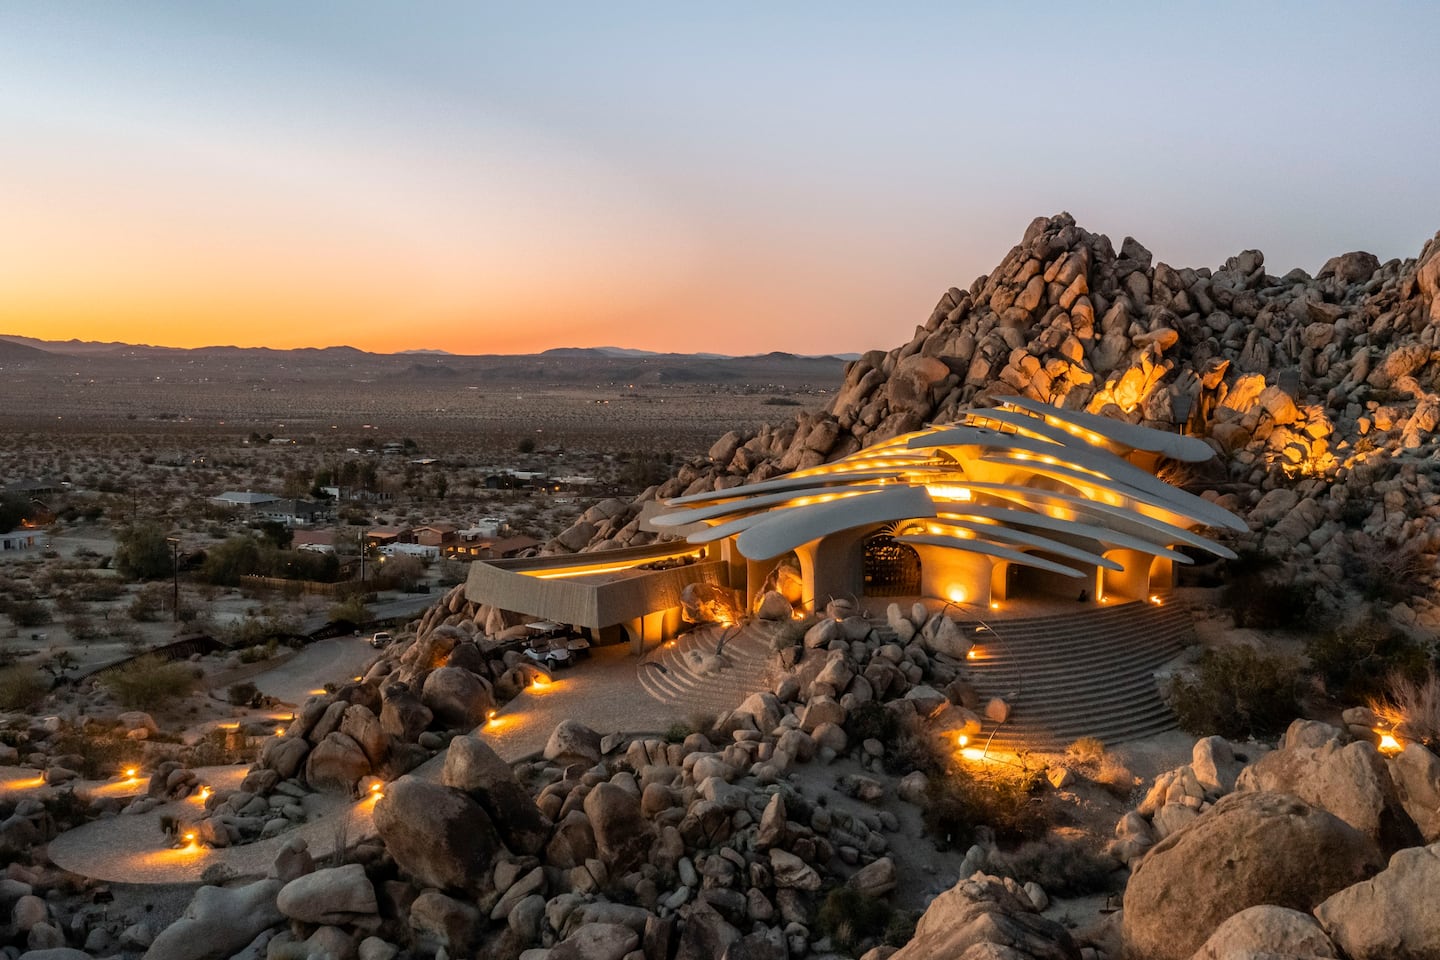 The famous Kellogg Doolittle estate in Joshua Tree, Calif., is an architectural marvel created over 25 years by architect Ken Kellogg and master craftsman John Vugrin.